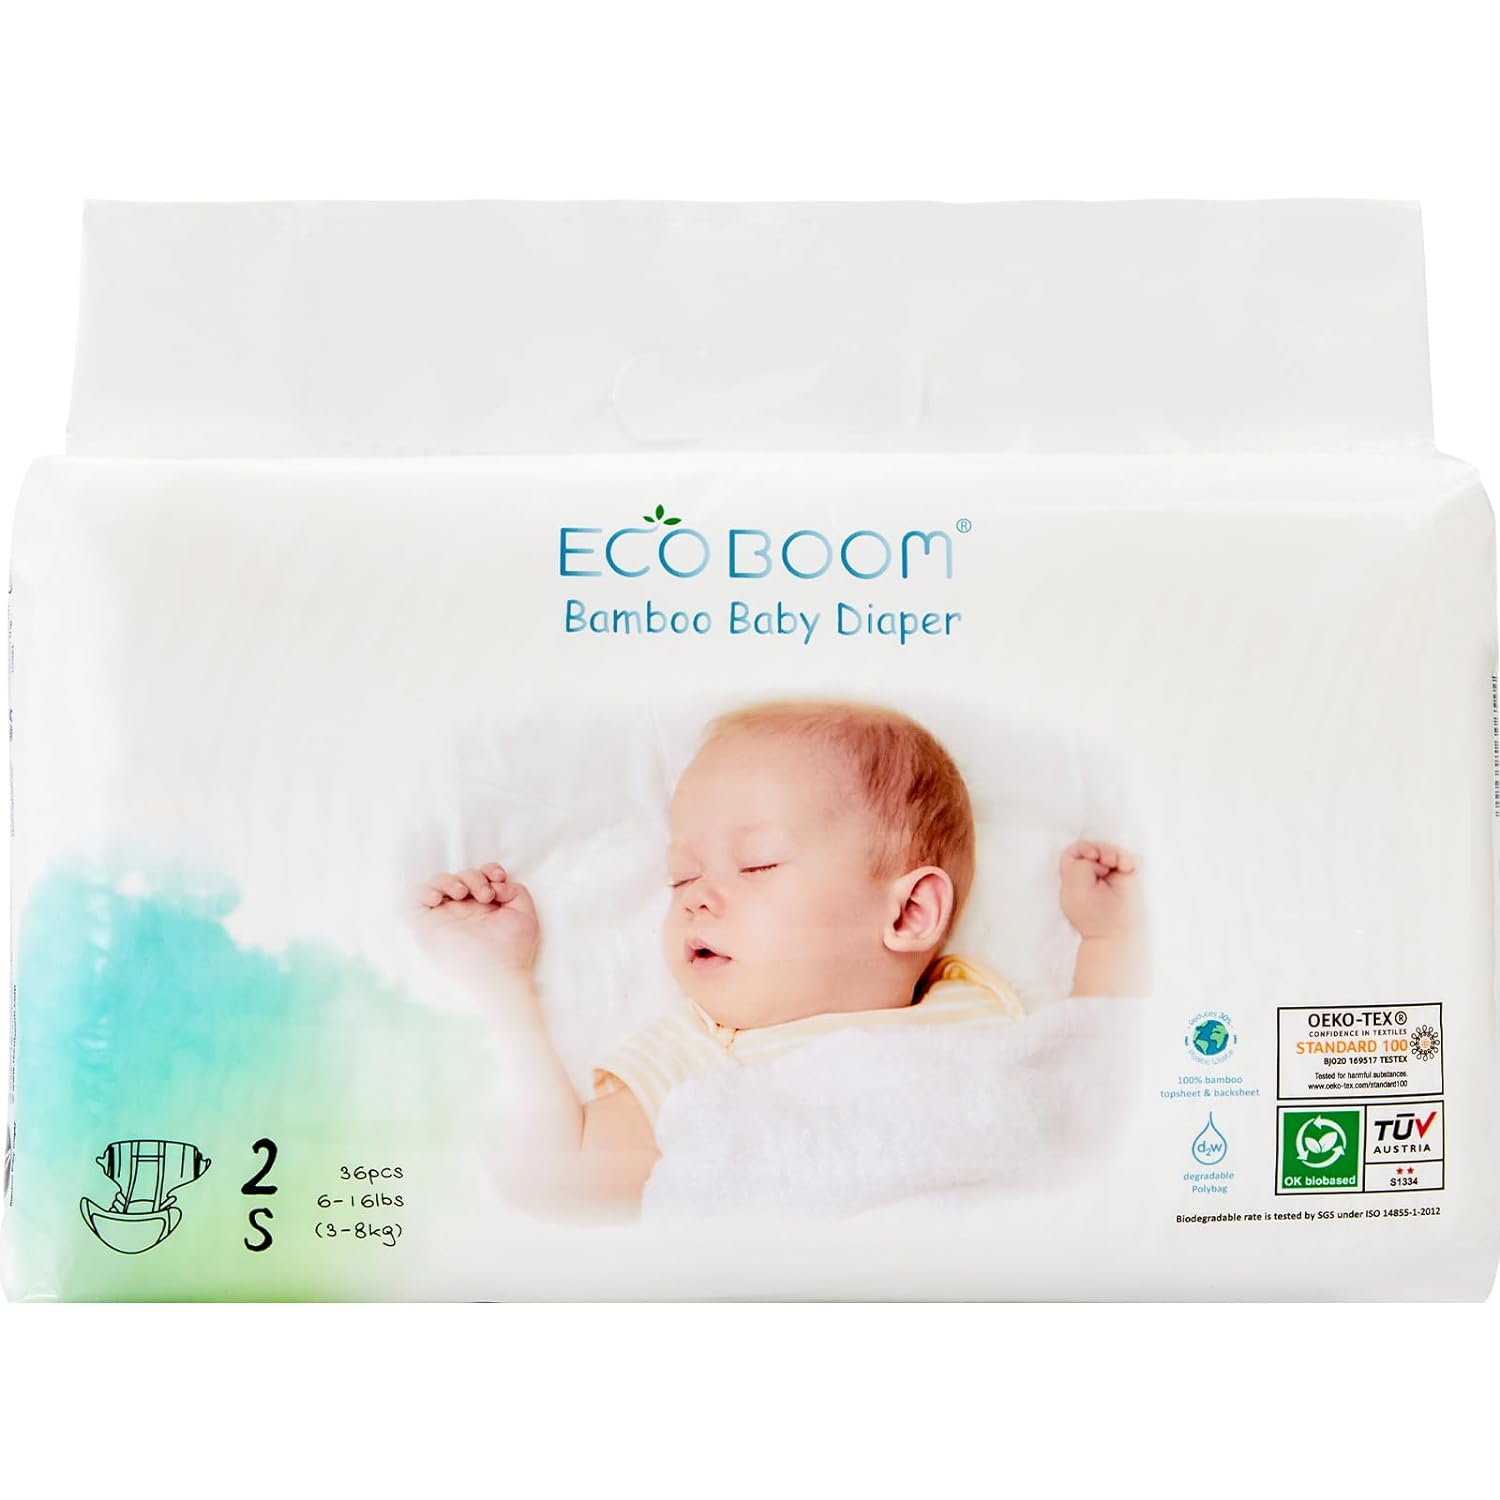 ECO BOOM Bamboo Viscose Baby Diapers 100% Natural Safe for Sensitive Skin